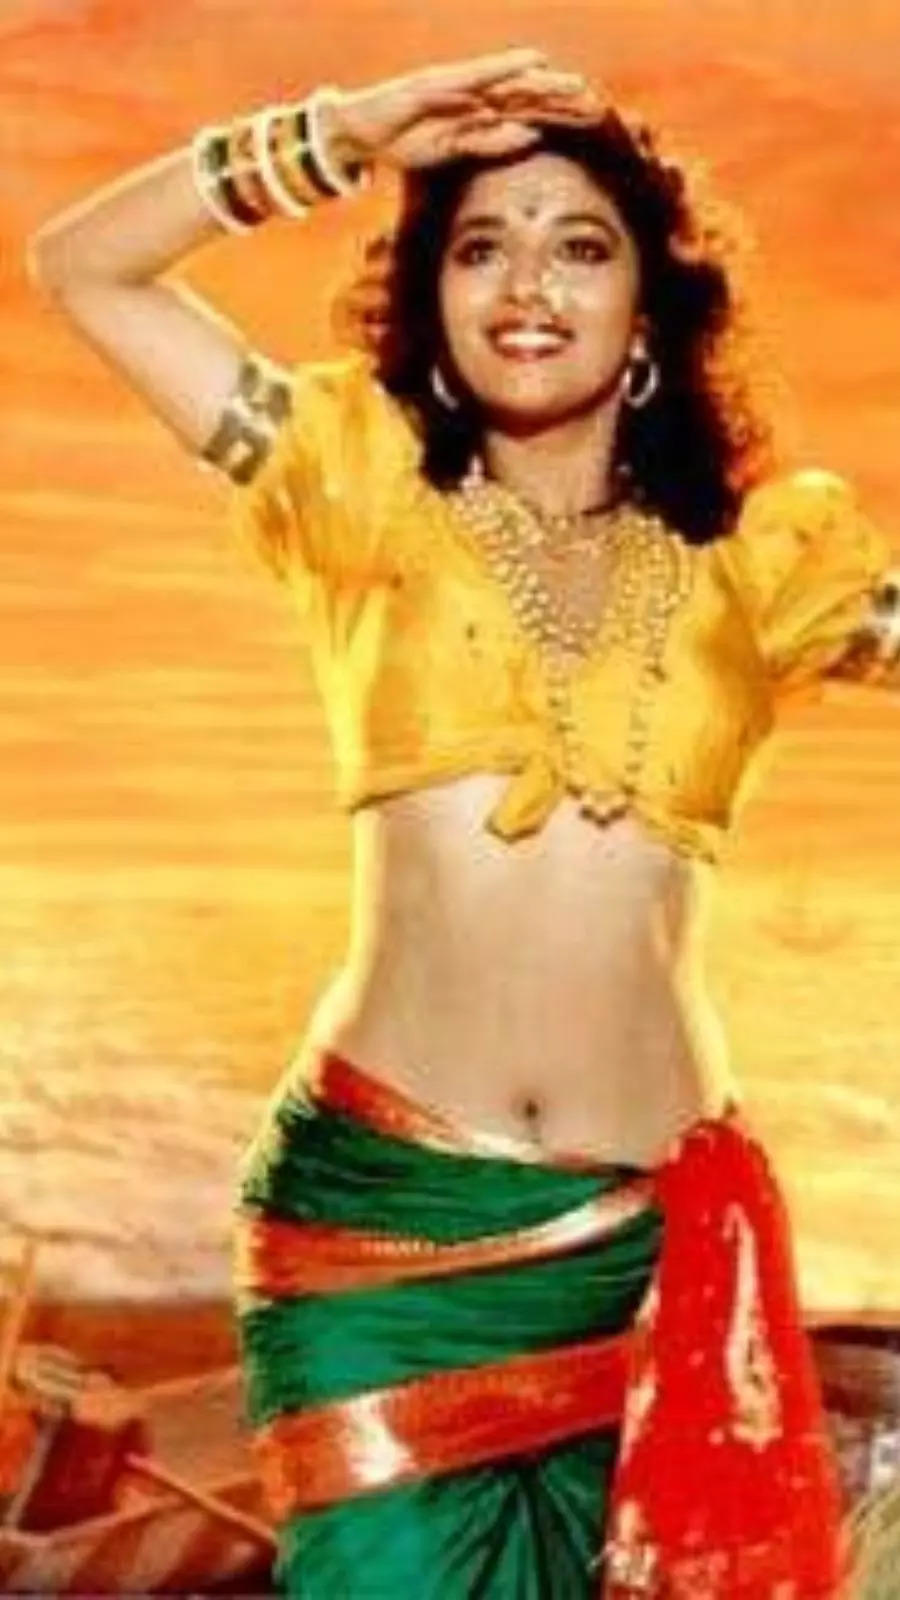 david safrit recommends madhuri dixit hot song pic